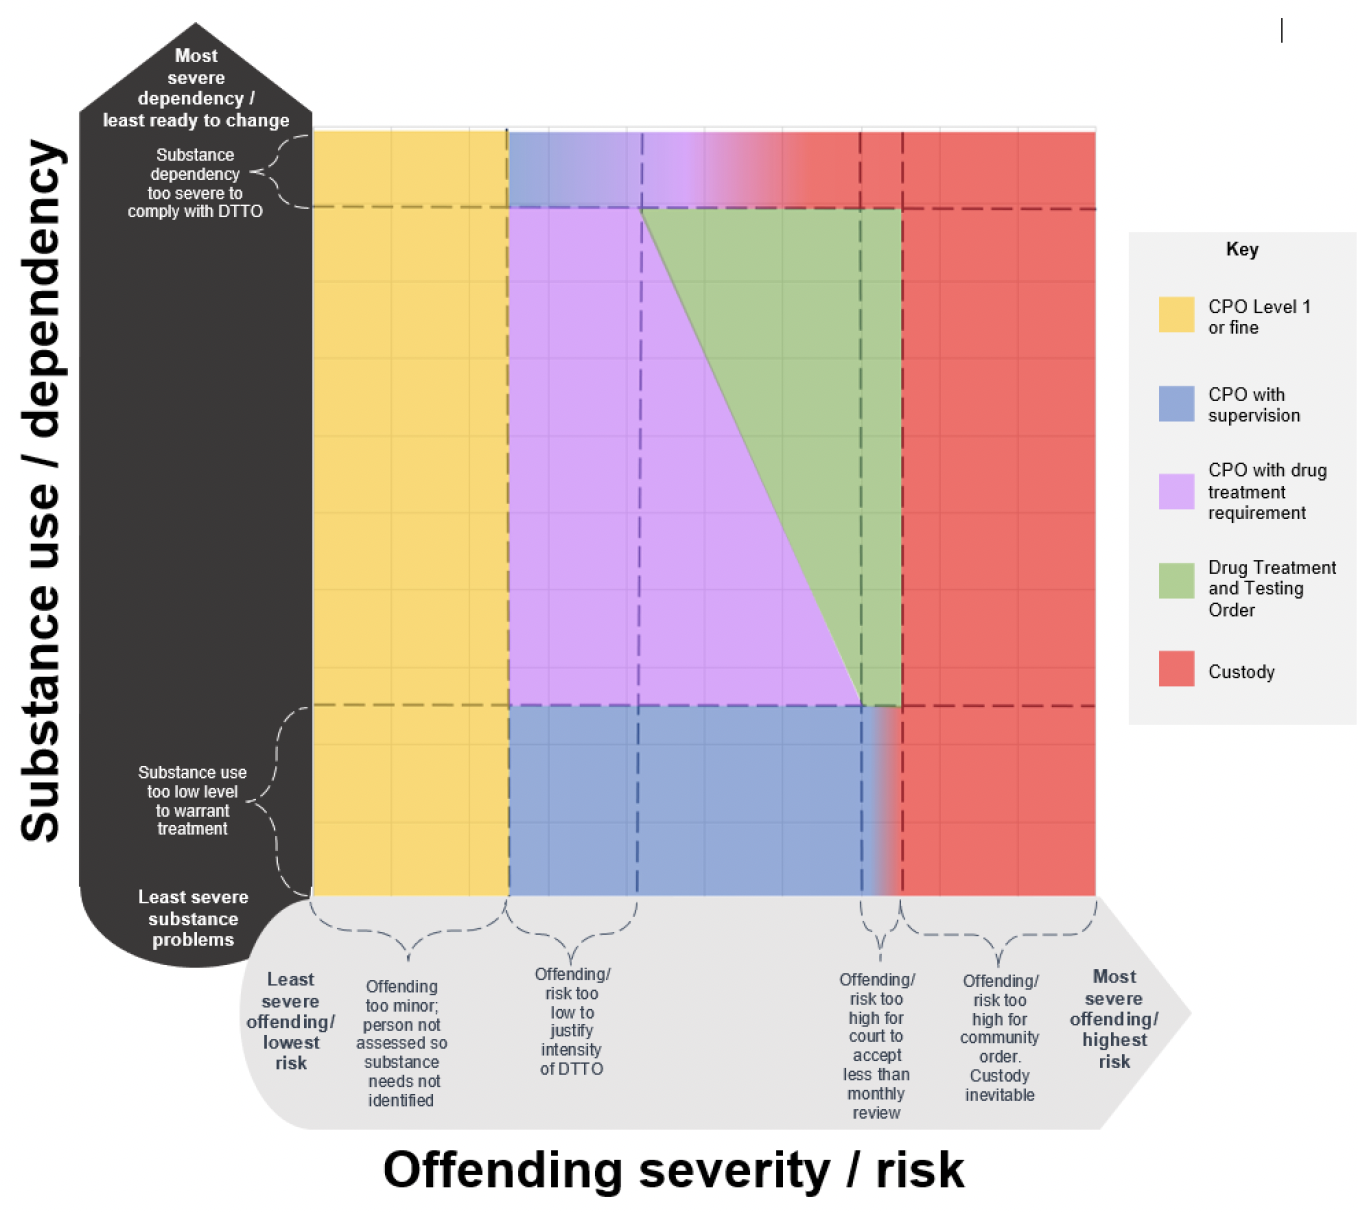 Diagram showing the approximate relationship between substance use and offending severity as criteria for community orders